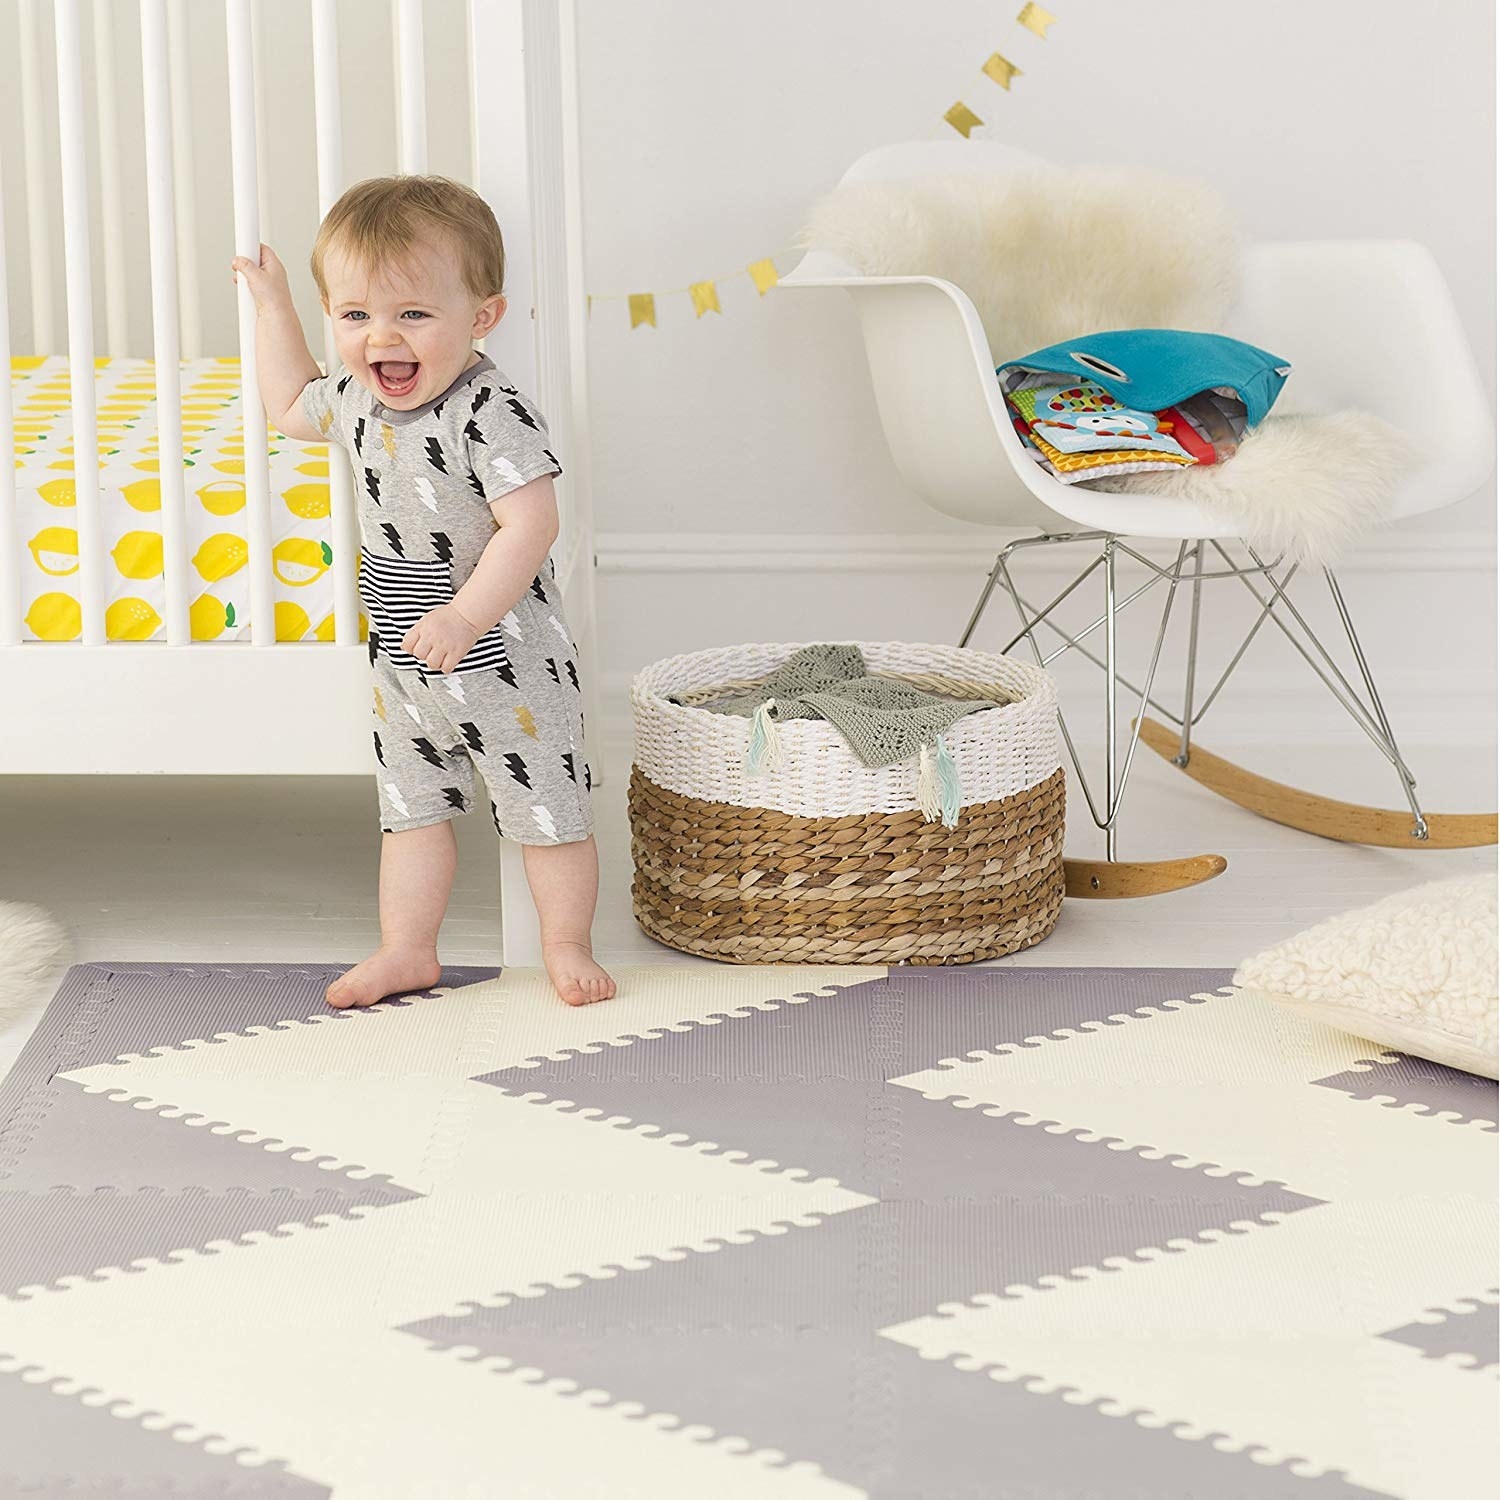 Child model standing on white and gray patterned floor mat